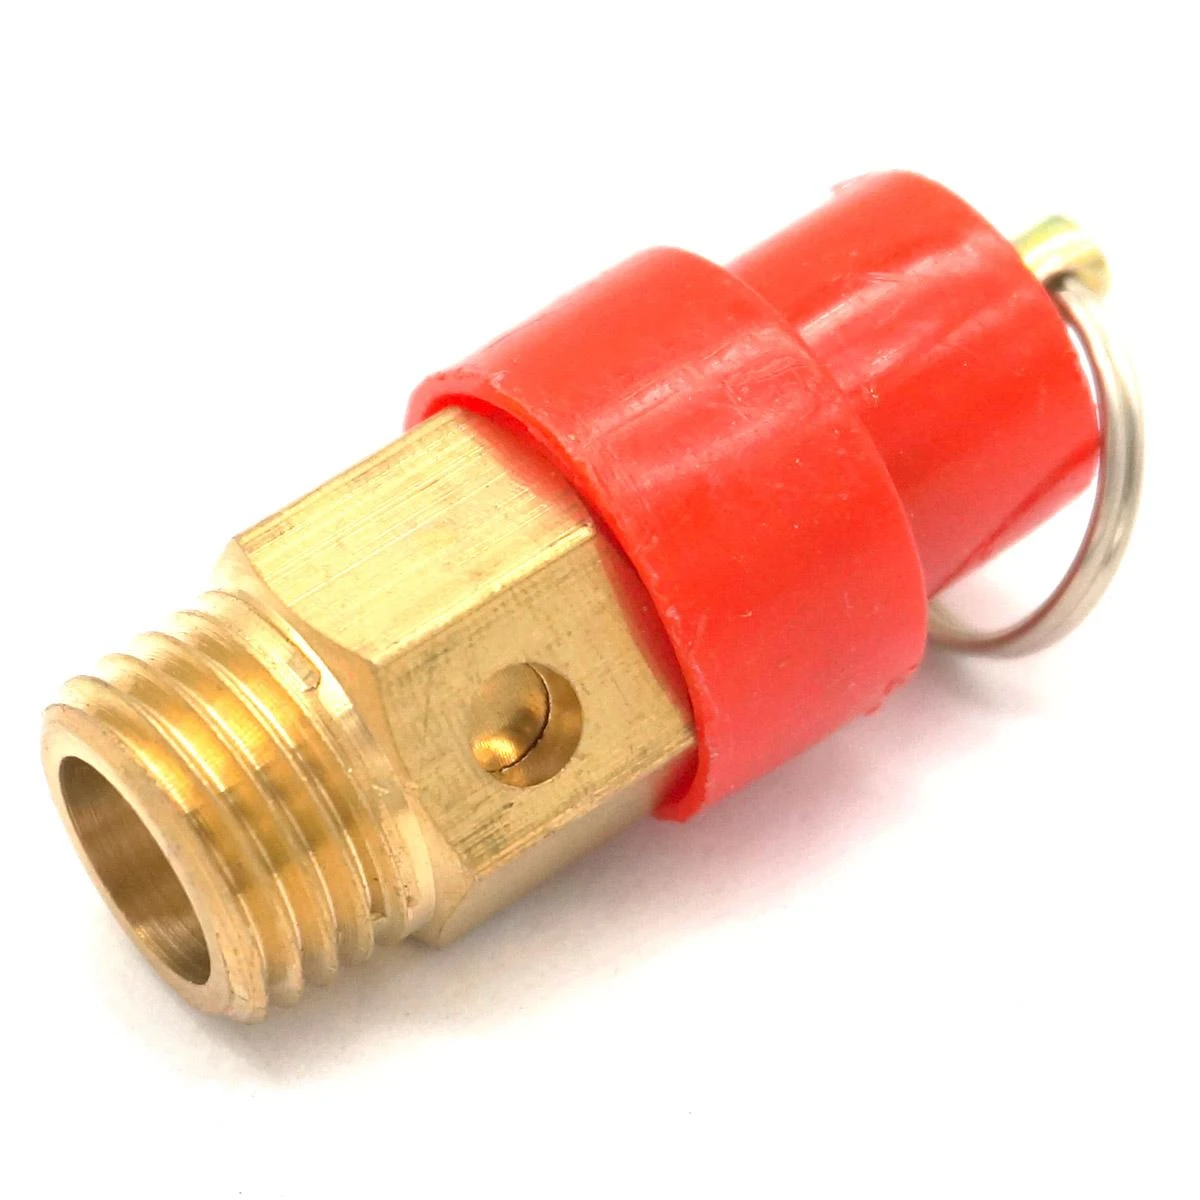 1/4" BSP Fitting Hydraulic Or Pneumatic Adjustable Pressure Switch